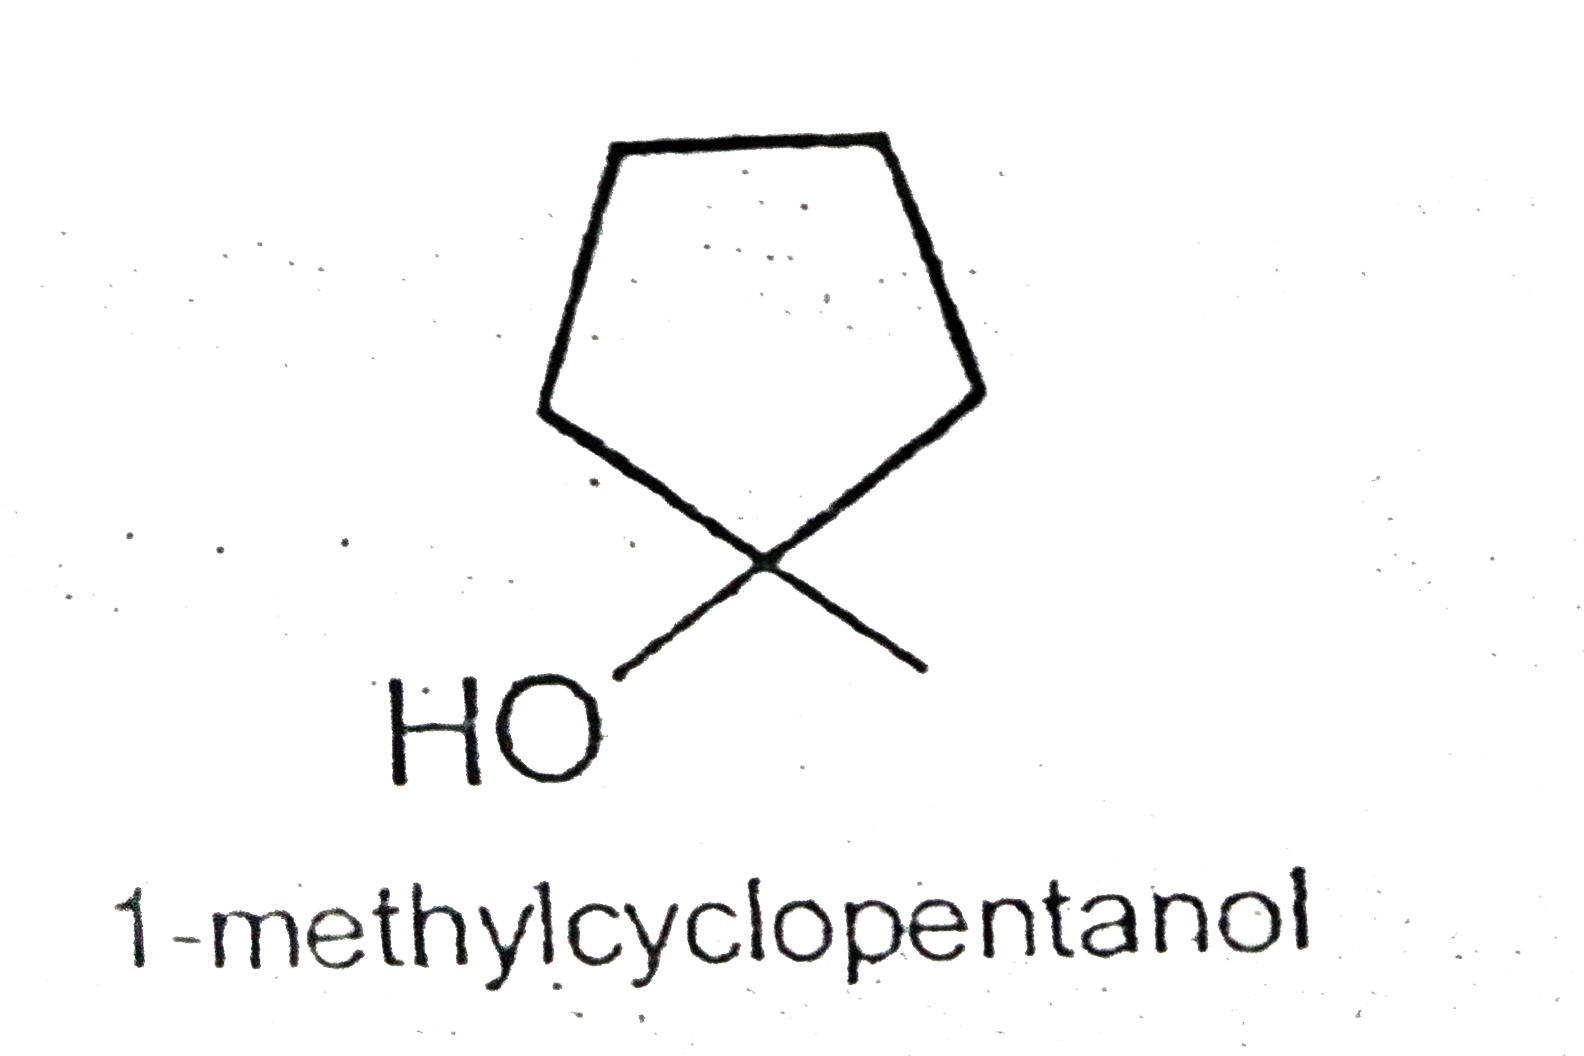 Design  a synthesis  of 1- methylcyclopentanol using  alcohol  with no  more than five  carbon  atoms  as the   only source  of carbon  in the  final  product.